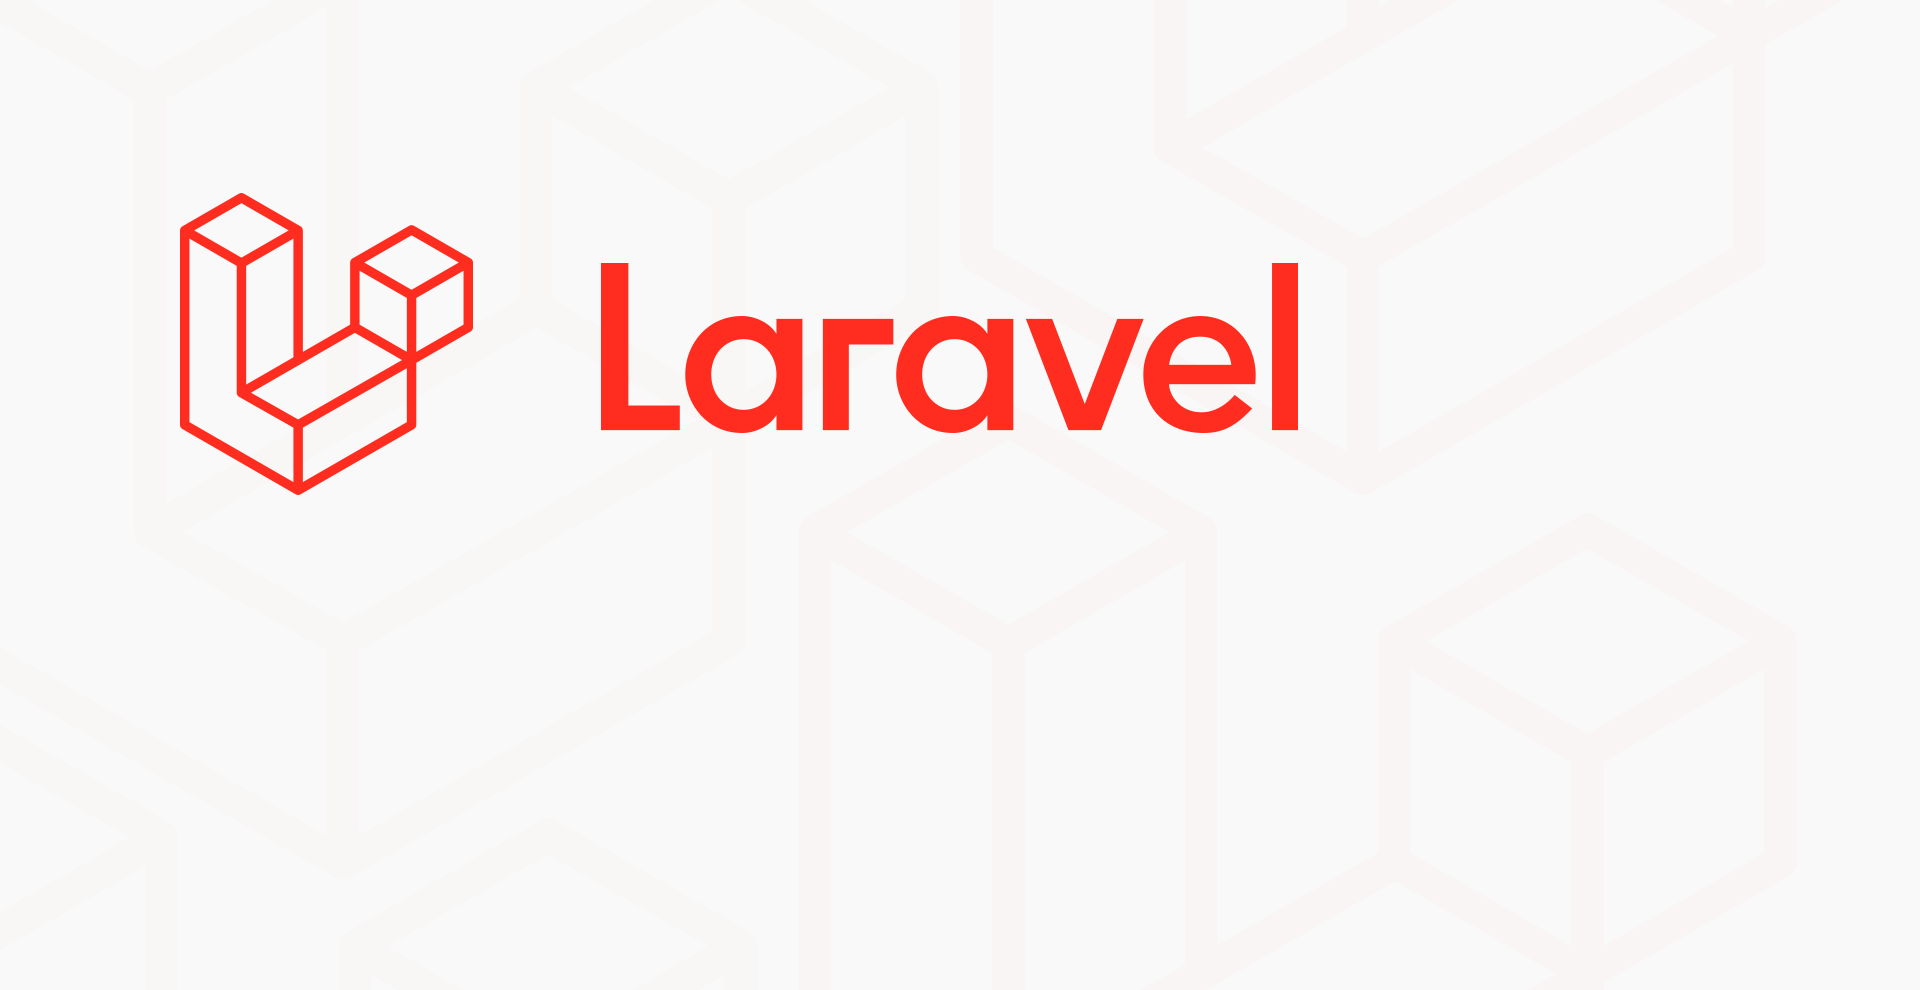 Laravel is an open-source web development framework. Find out if it’s the right choice for your next development project.